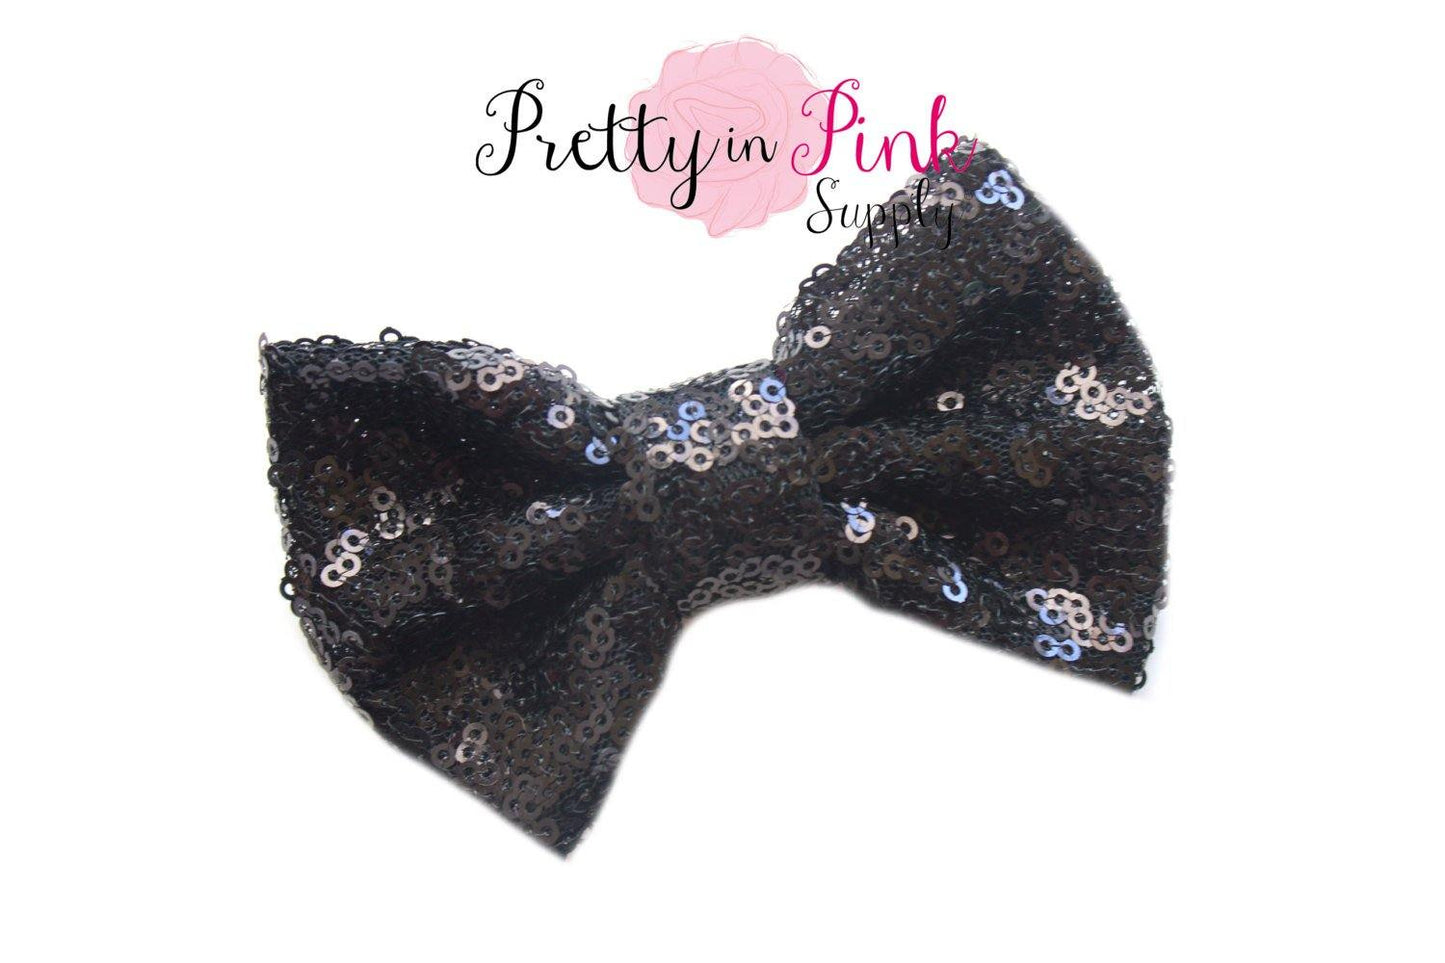 4" Large Sequin Bows - Pretty in Pink Supply